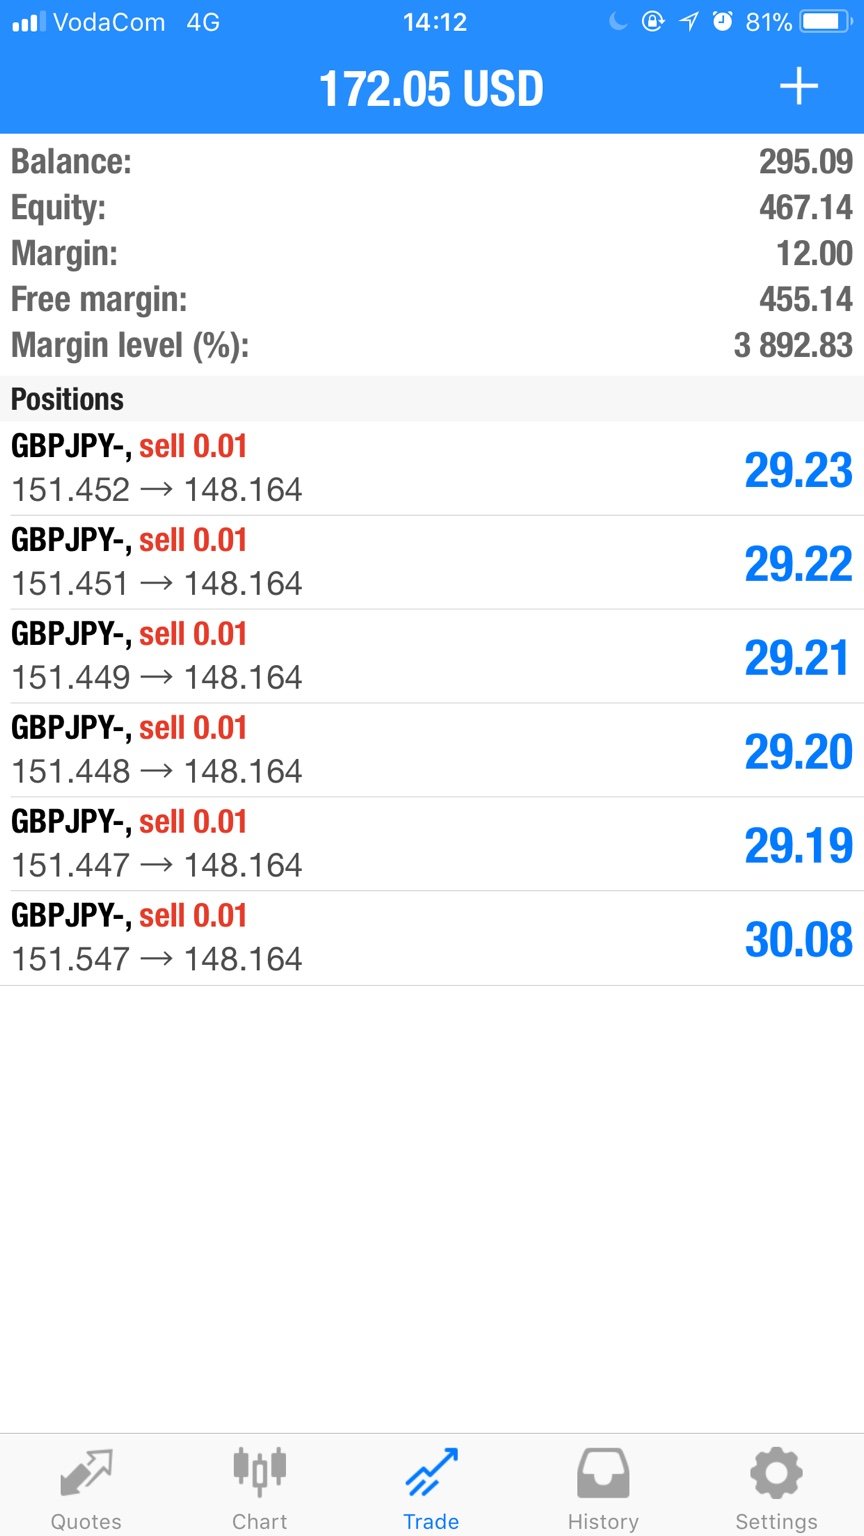 1 lot size in forex